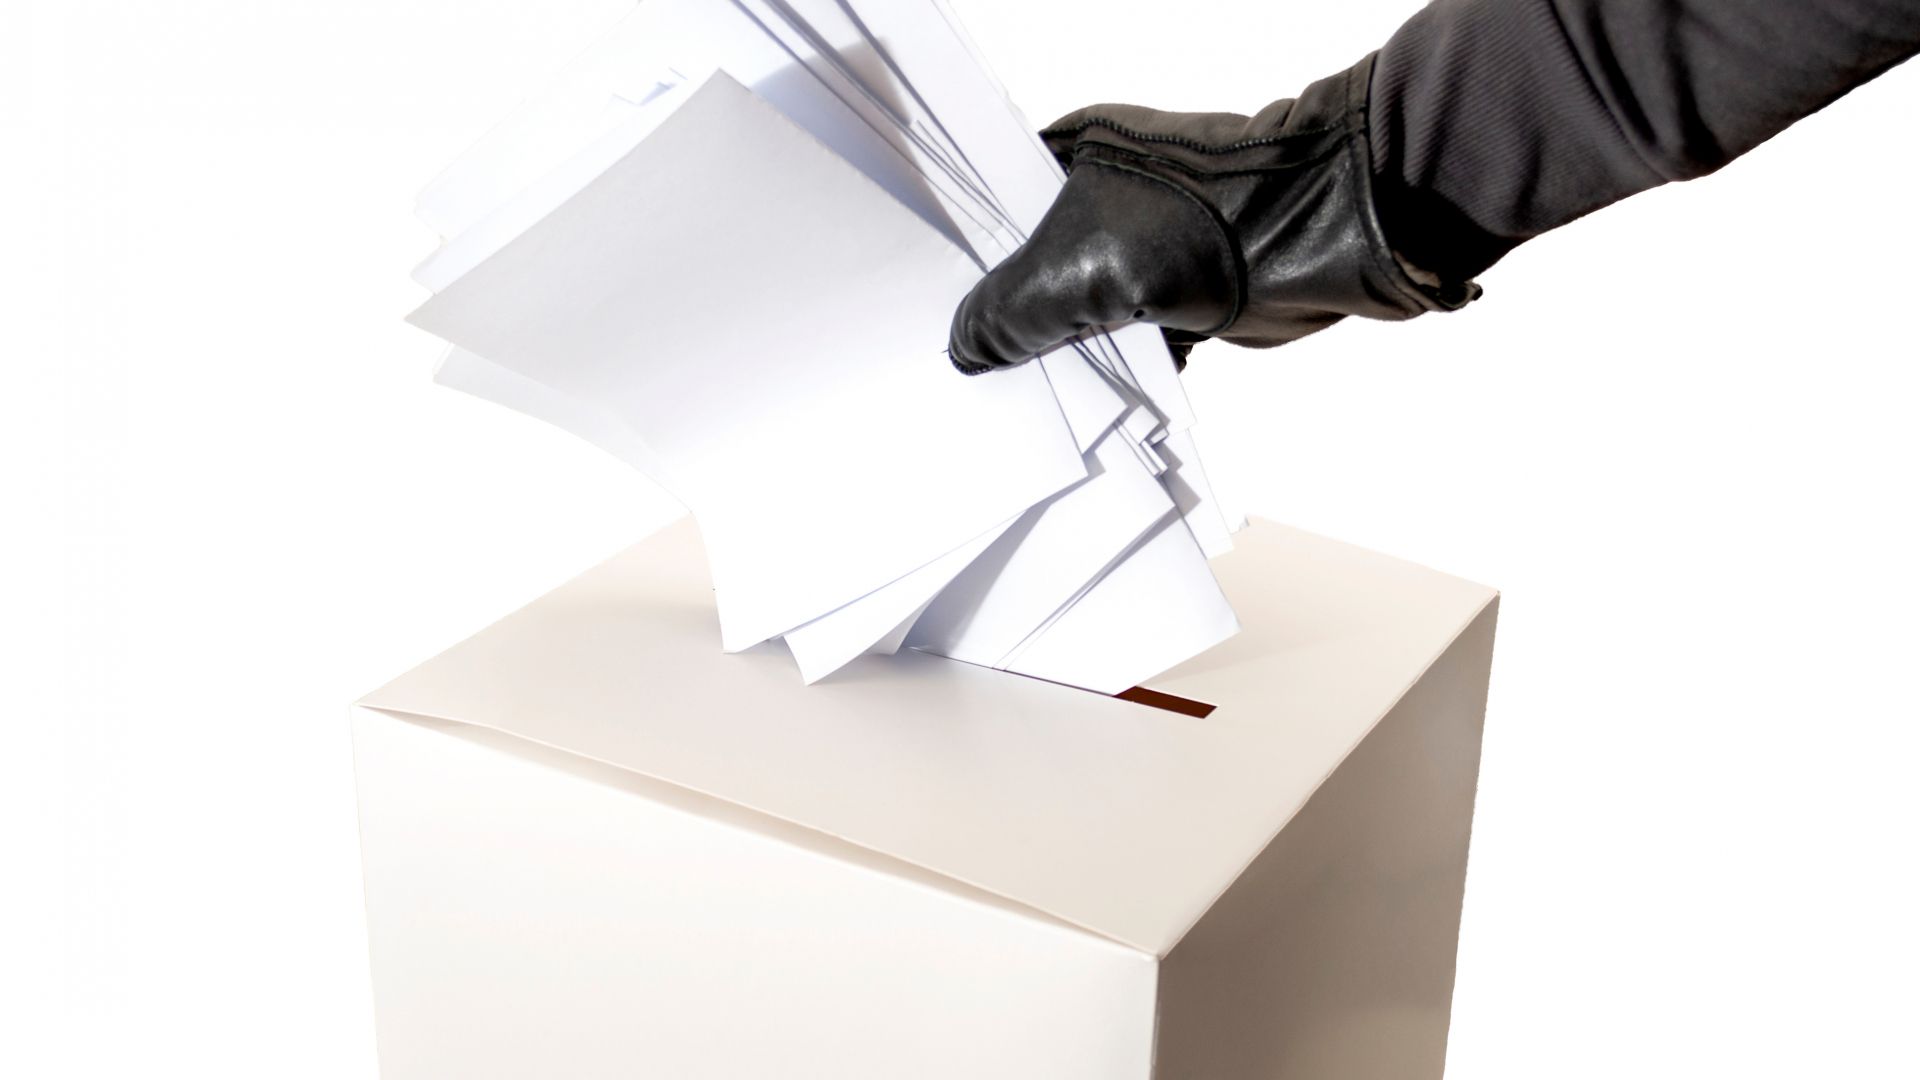 Electoral interference - ballot box and gloved hand